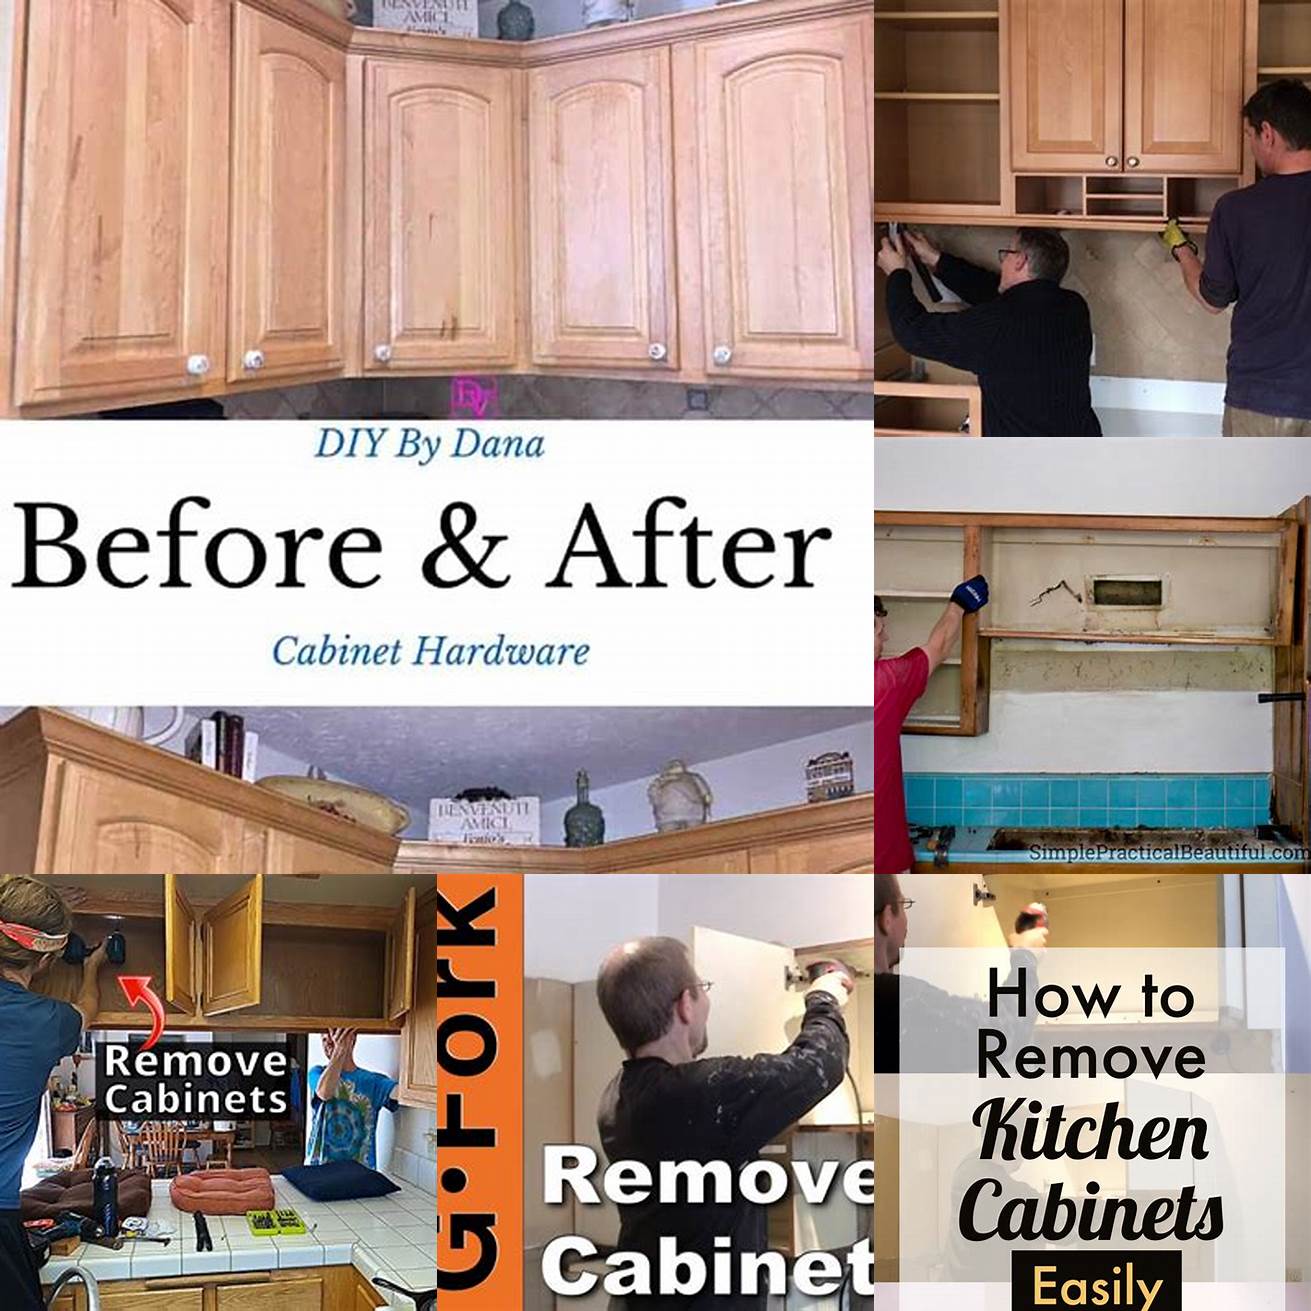 Step 1 Remove the Old Cabinet